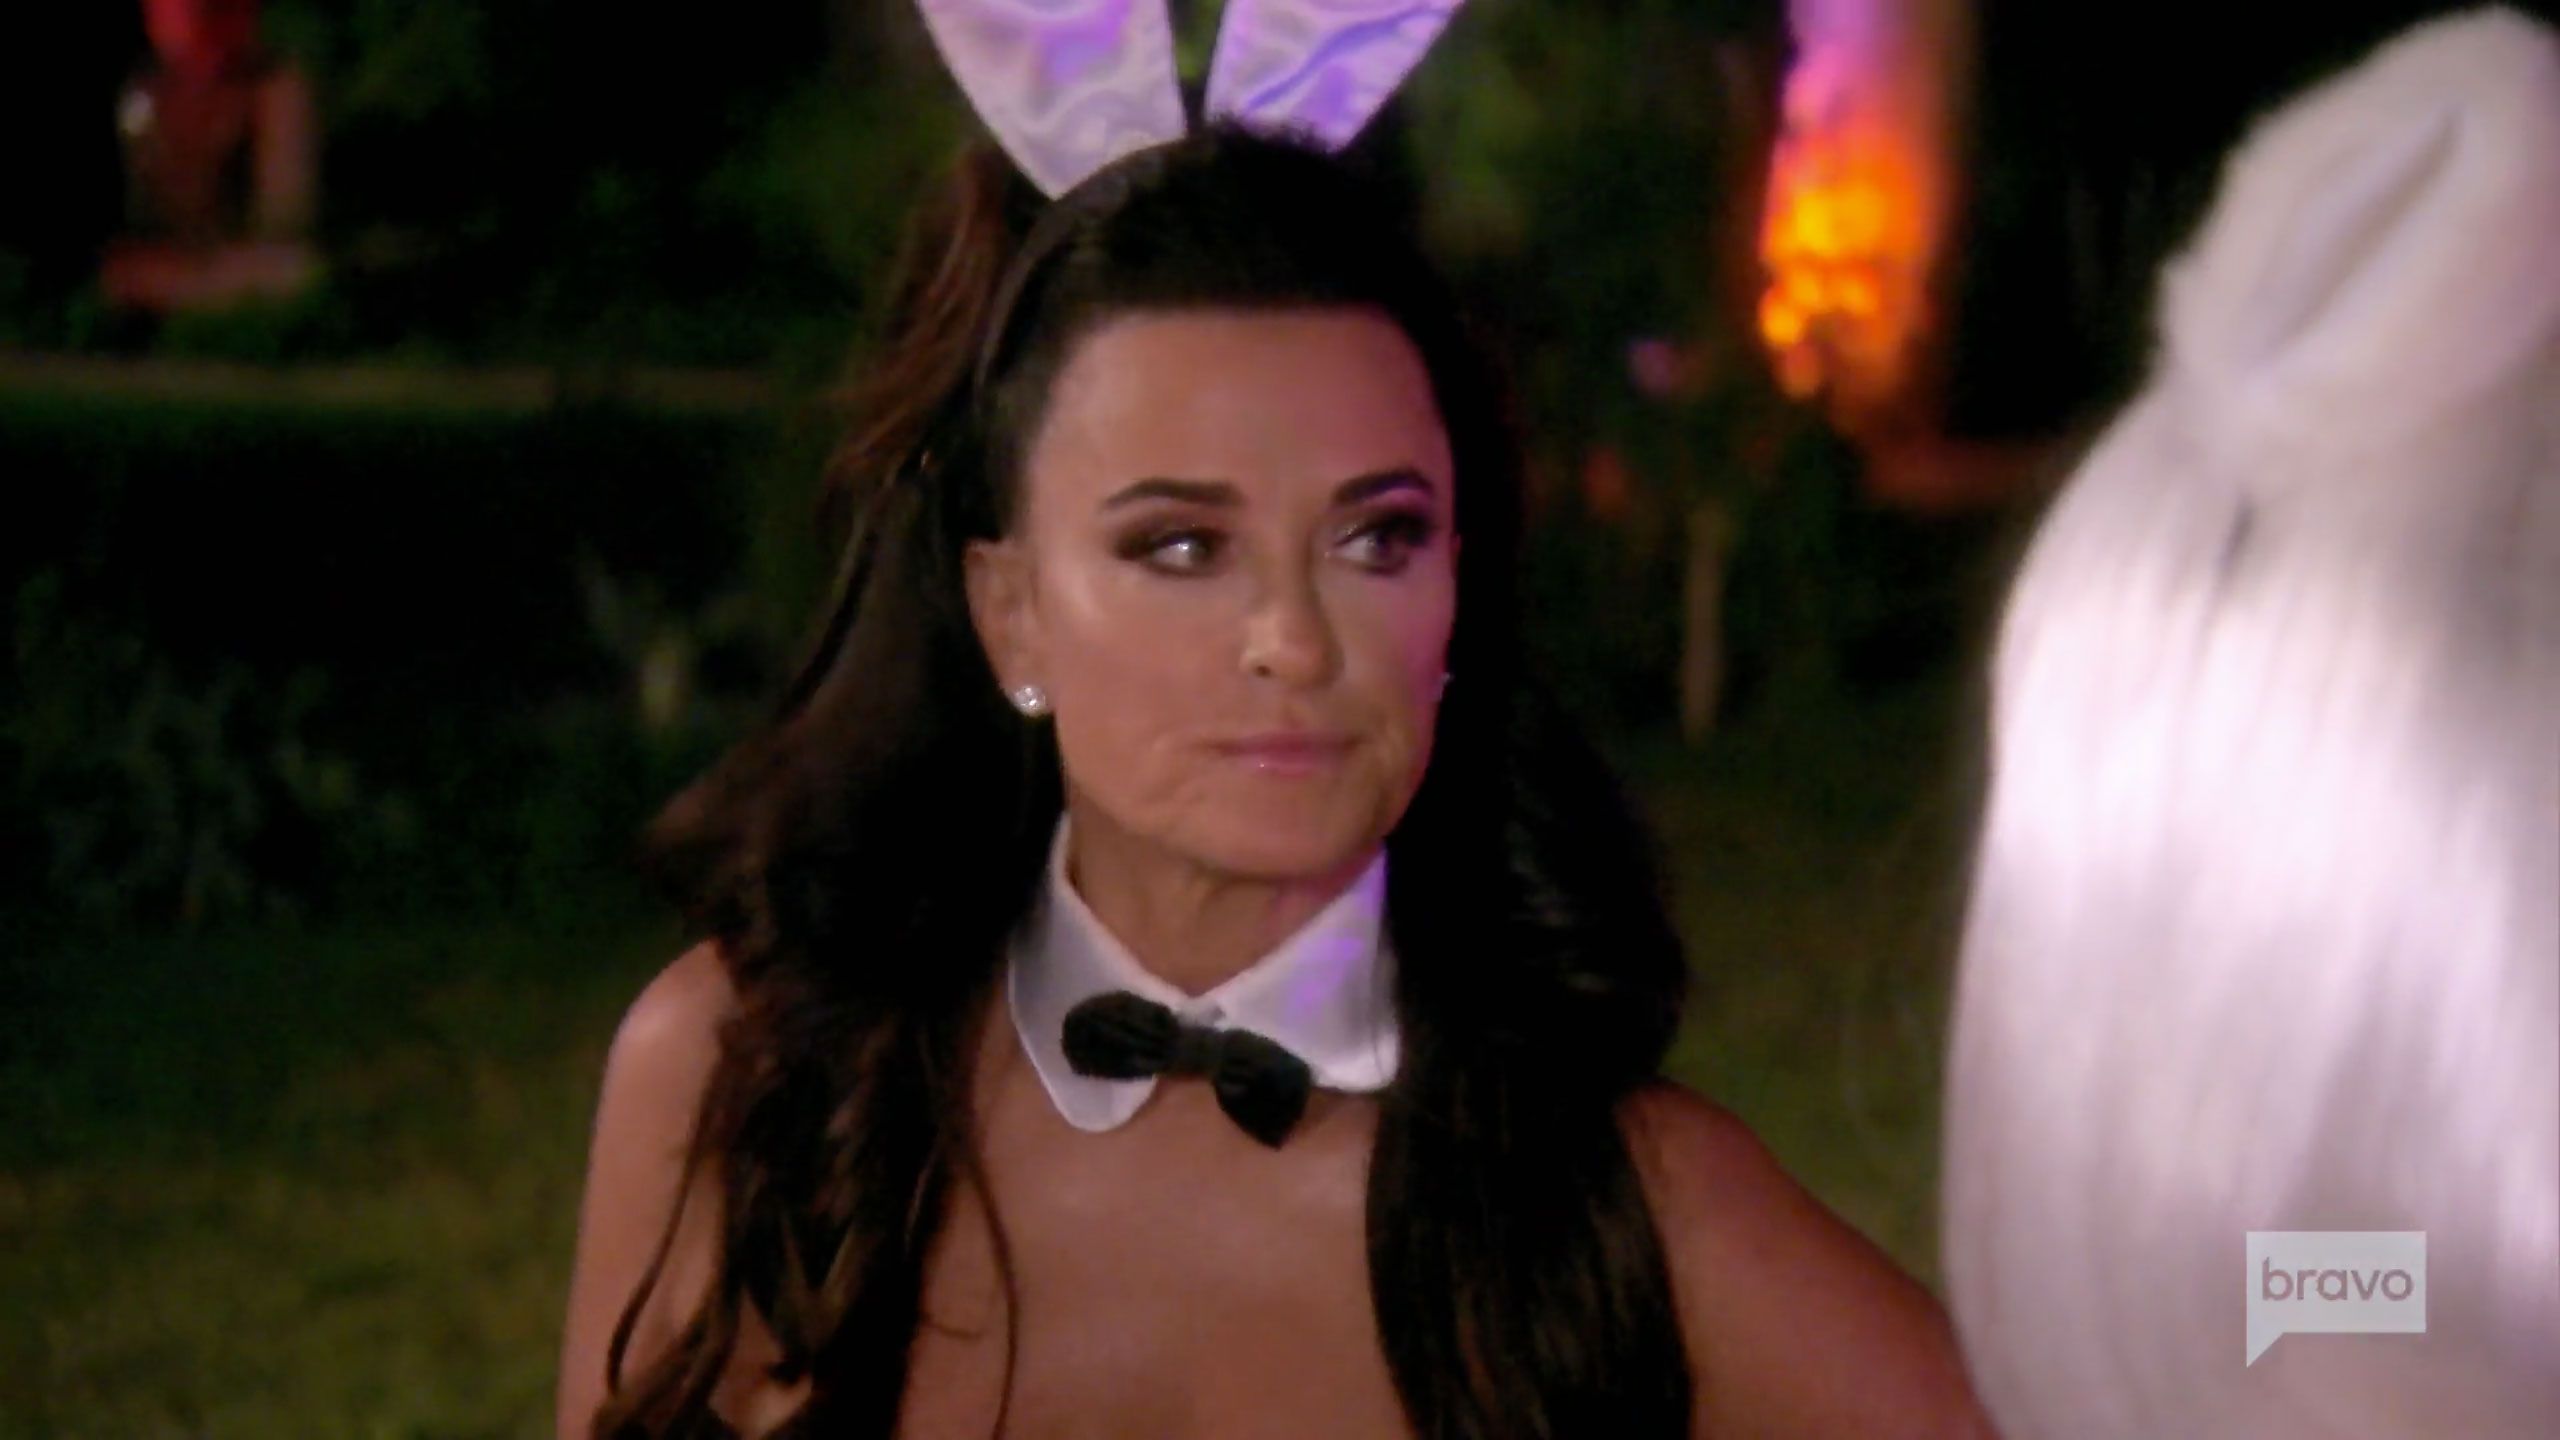 Kyle Richards Jokes About Not Letting Daughters Do Reality TV